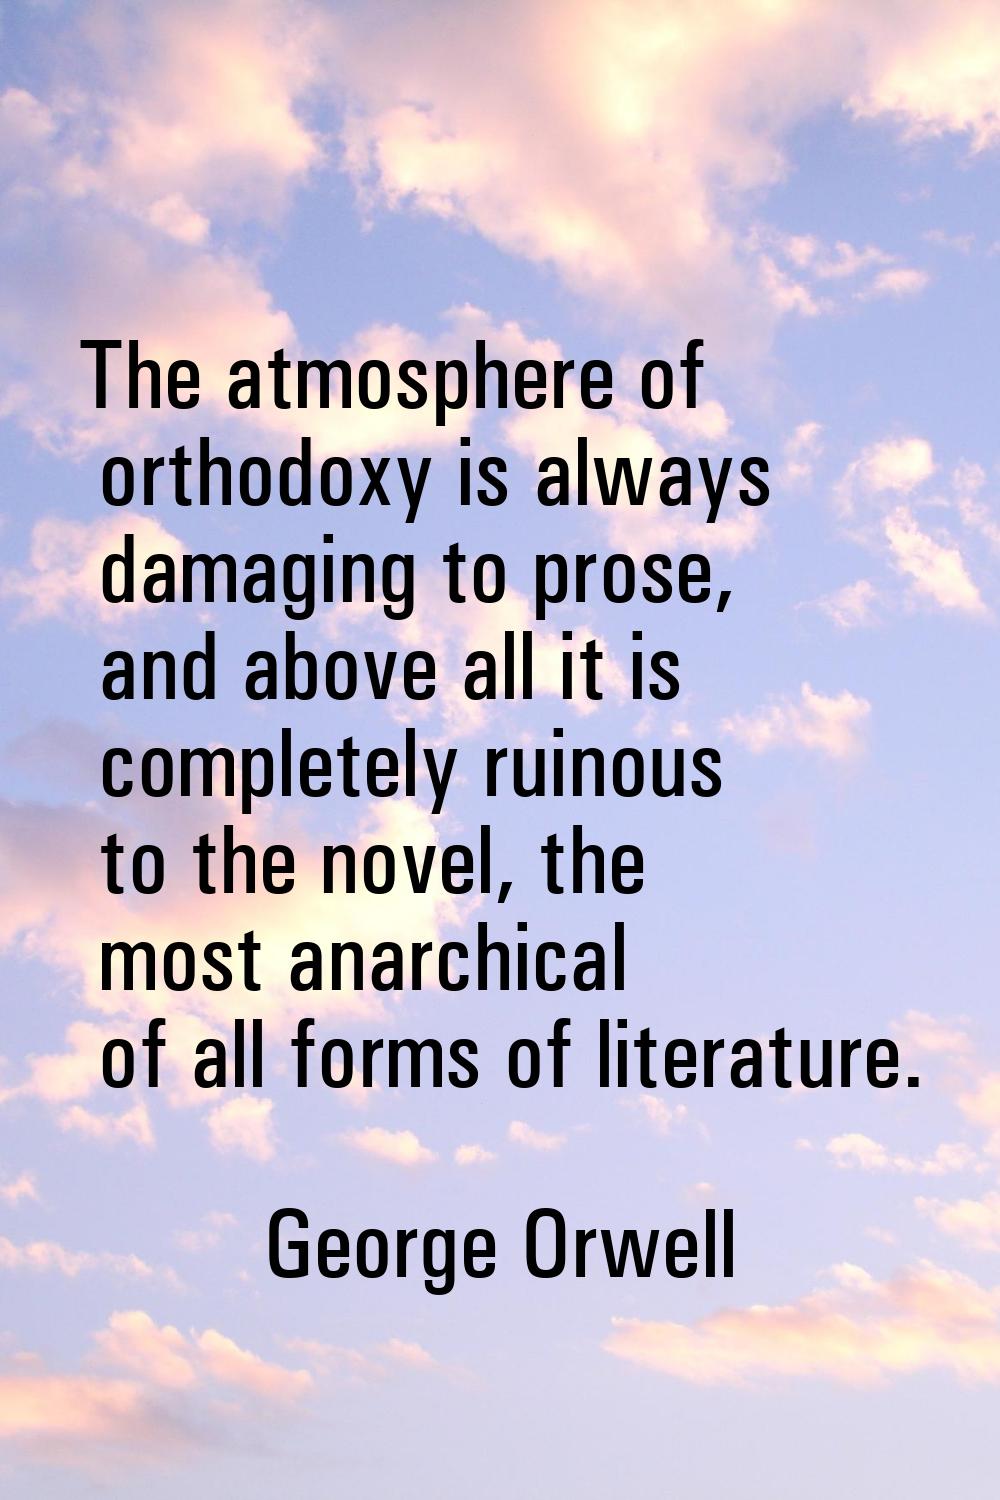 The atmosphere of orthodoxy is always damaging to prose, and above all it is completely ruinous to 